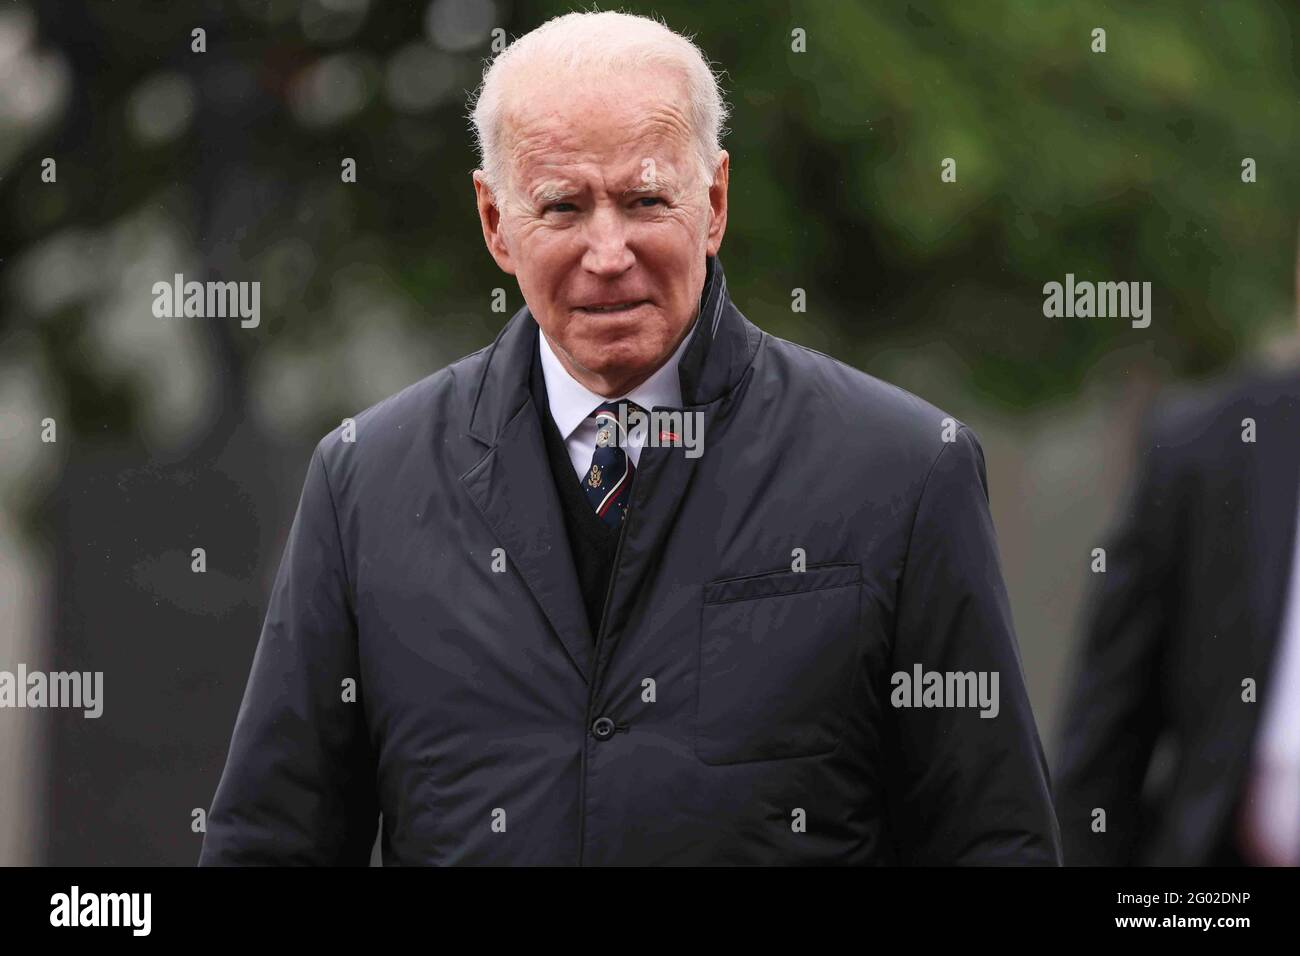 United States President Joe Biden departs a traditional Memorial Day Ceremony, Sunday, May 30, 2021, at Veterans Memorial Park in New Castle, Delaware.Credit: Saquan Stimpson/CNP /MediaPunch Stock Photo